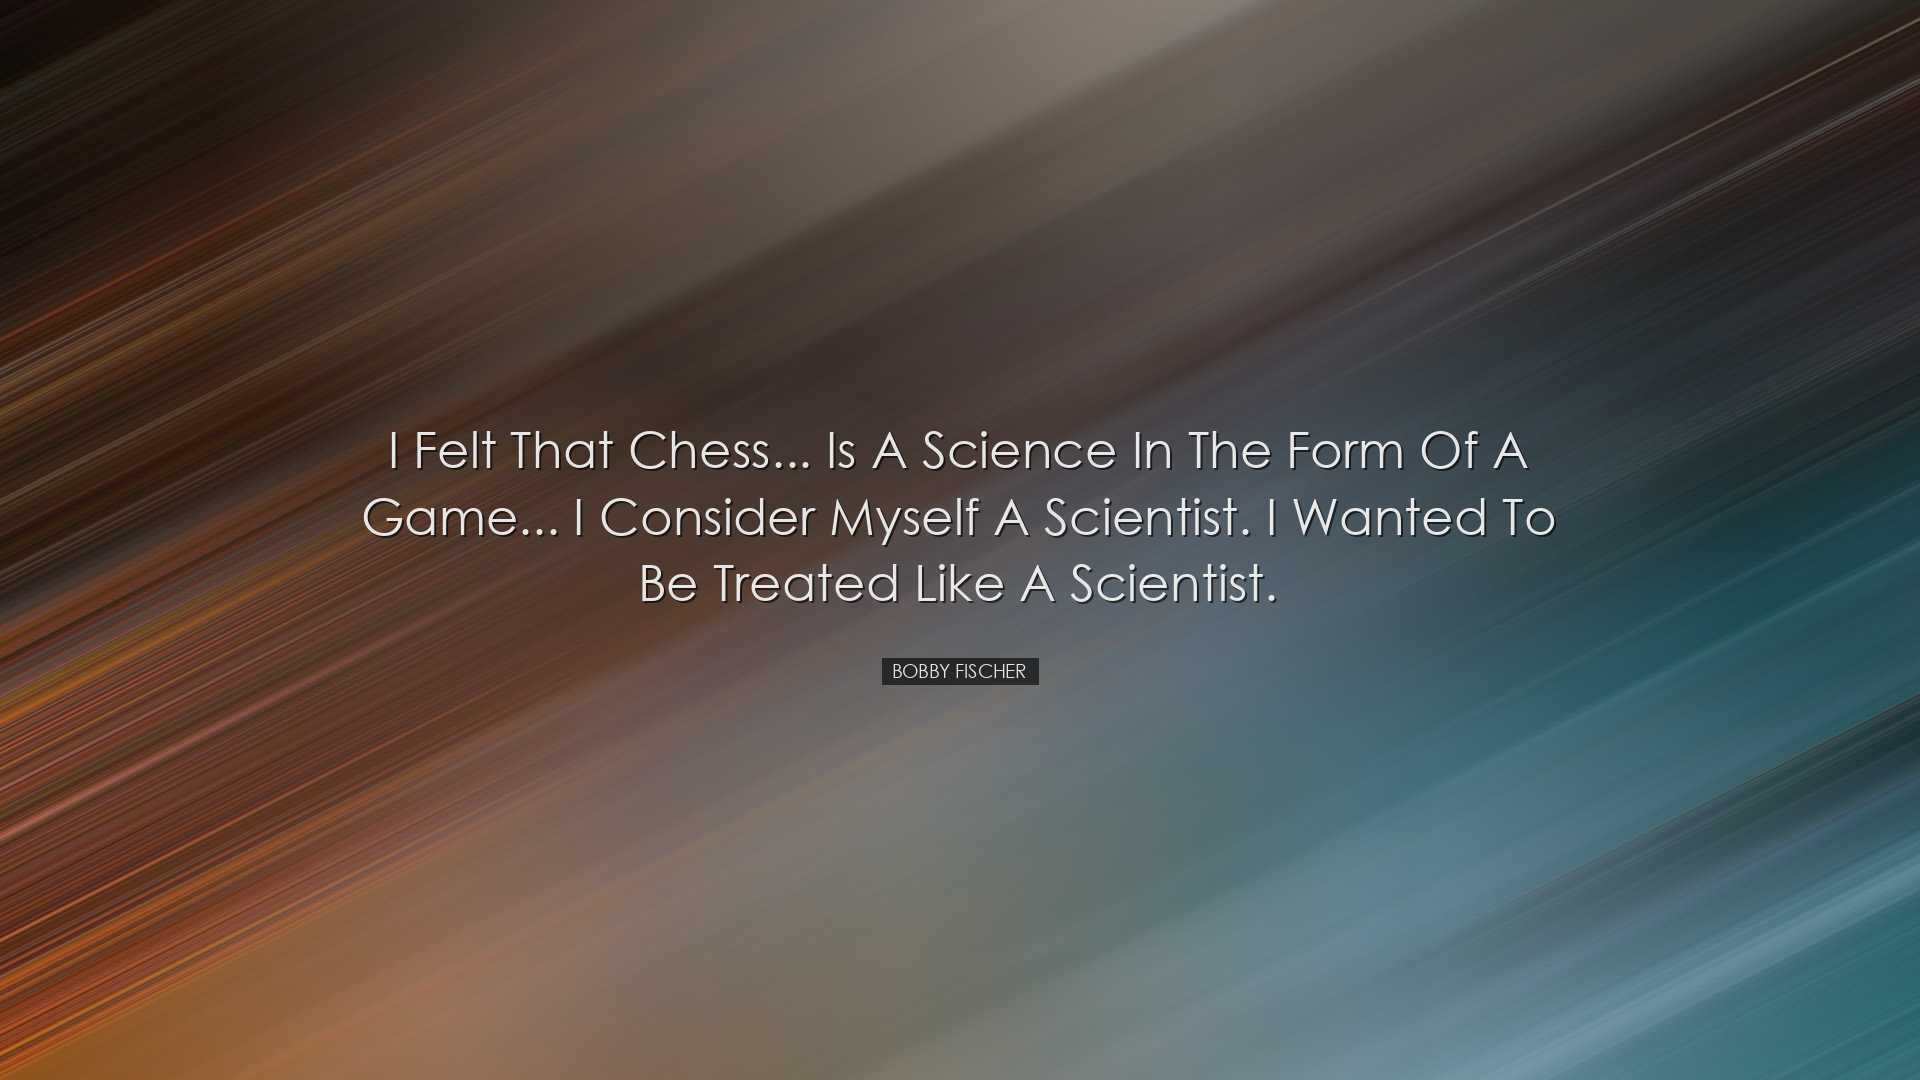 I felt that chess... is a science in the form of a game... I consi